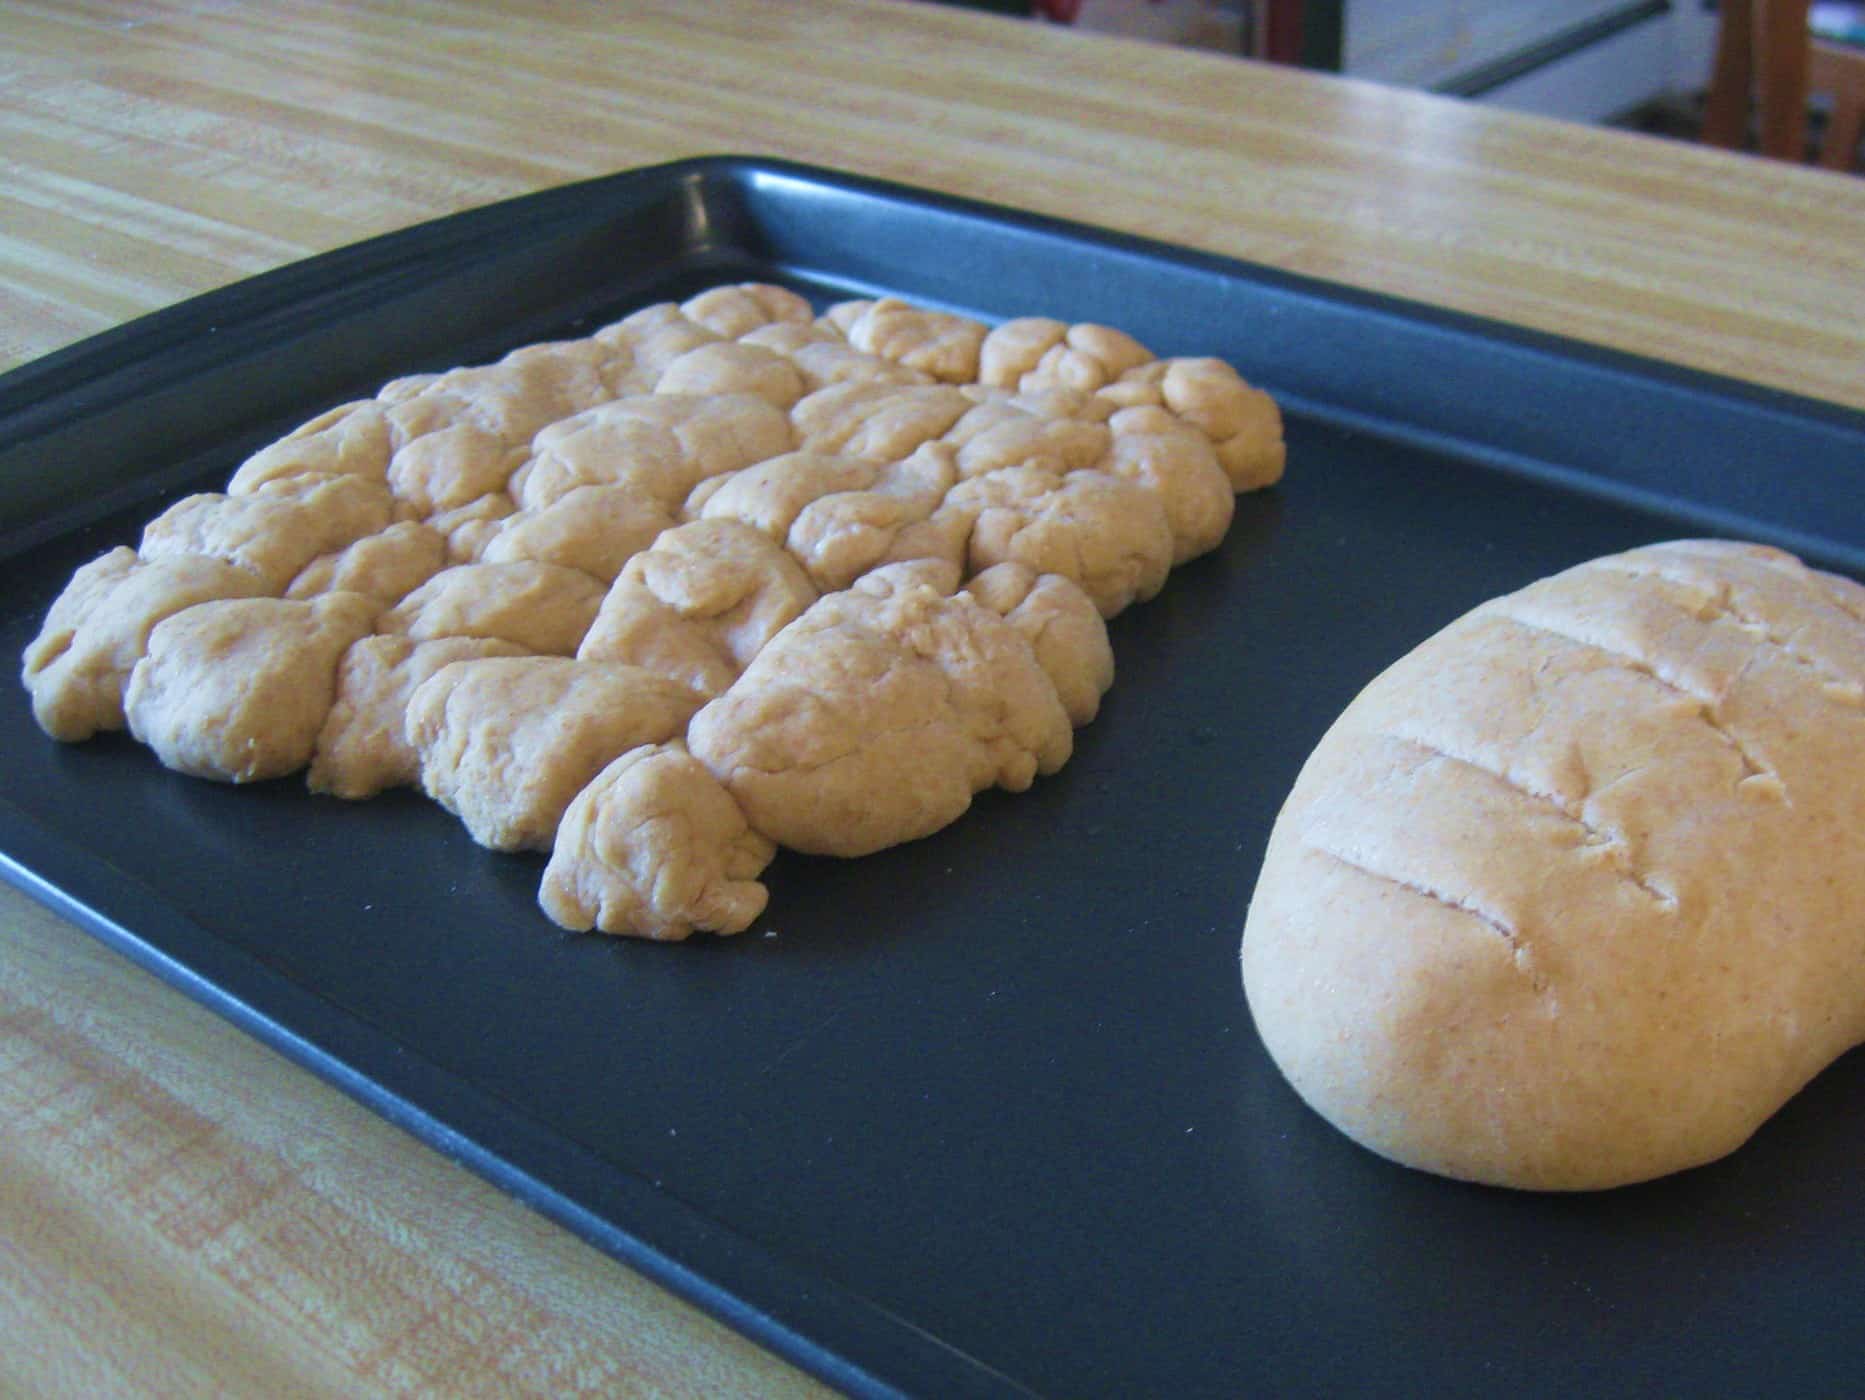 bread dough on cookie sheet on table, bread making